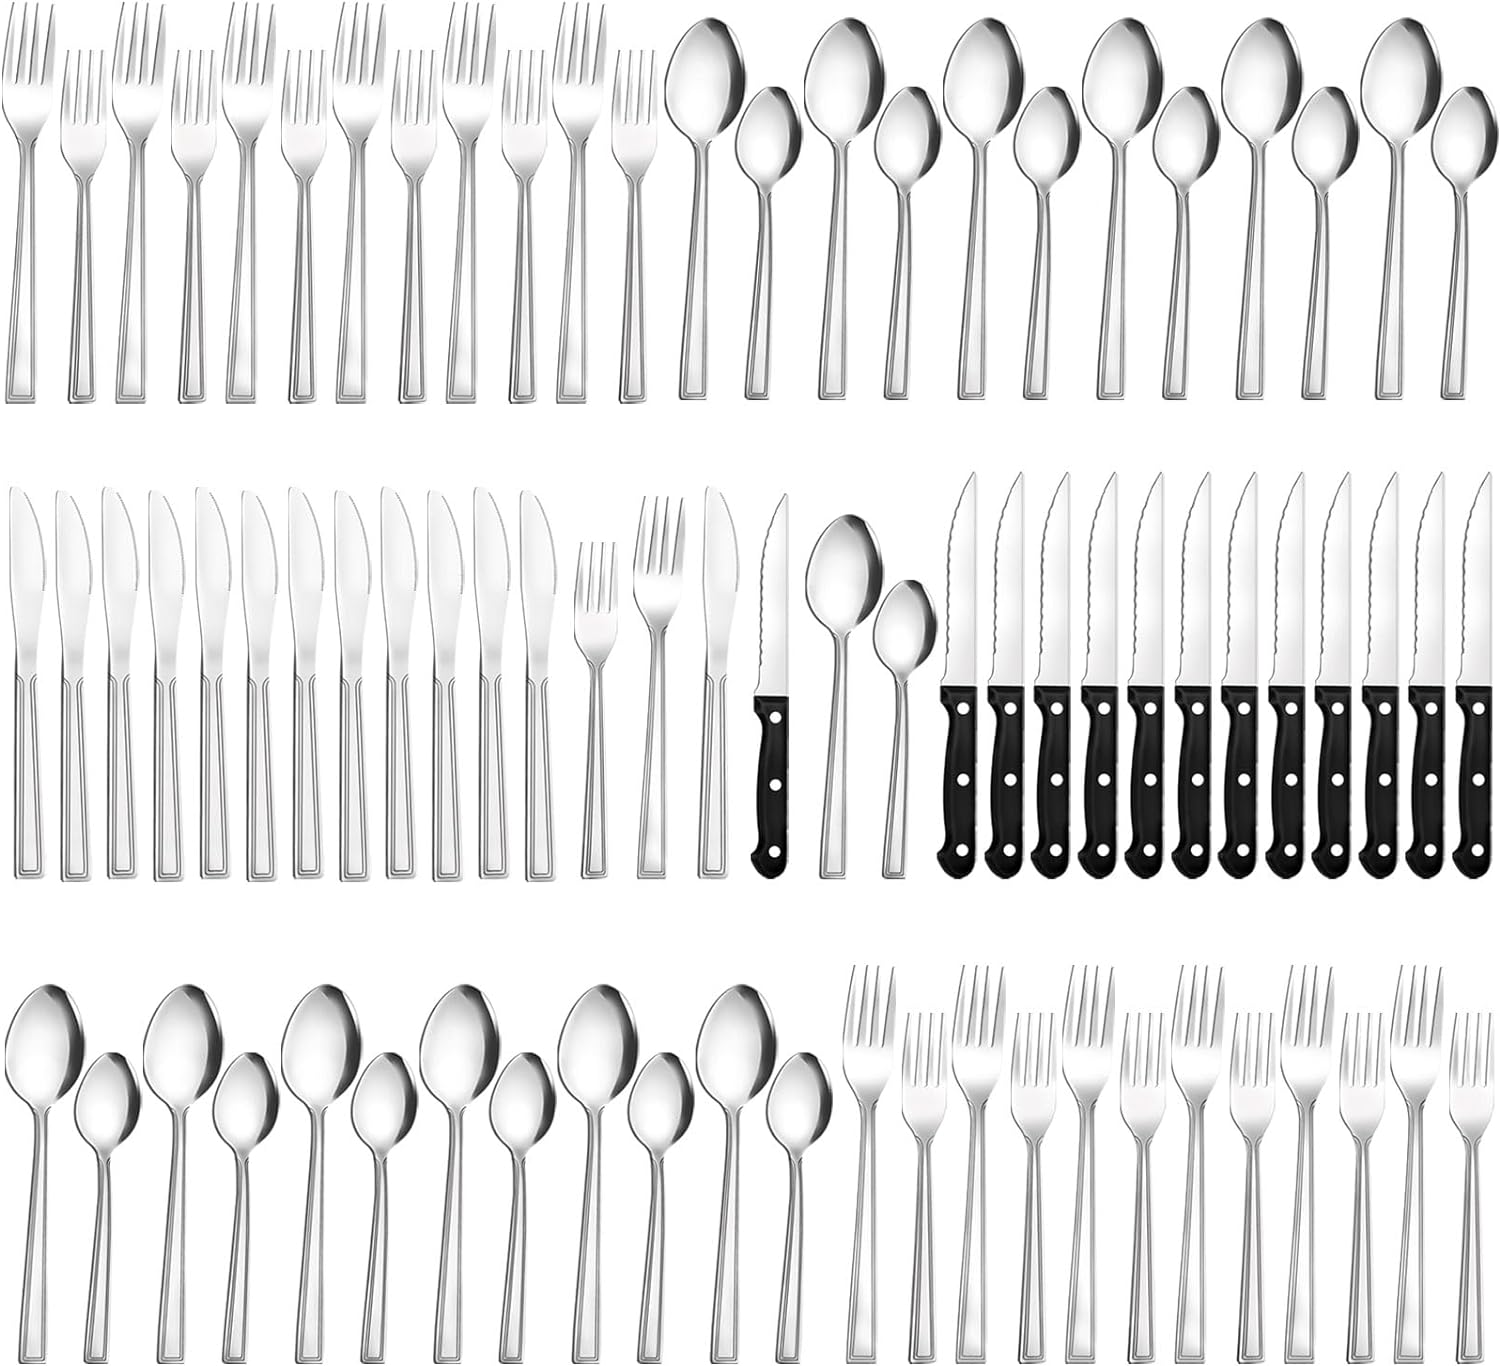 72-Piece Silverware Set with Steak Knives, Funnydin Forks and Spoons Silverware Set for 12, Food-Grade Stainless Steel Flatware Cutlery Set, Utensil Sets for Home Kitchen Restaurant, Dishwasher Safe